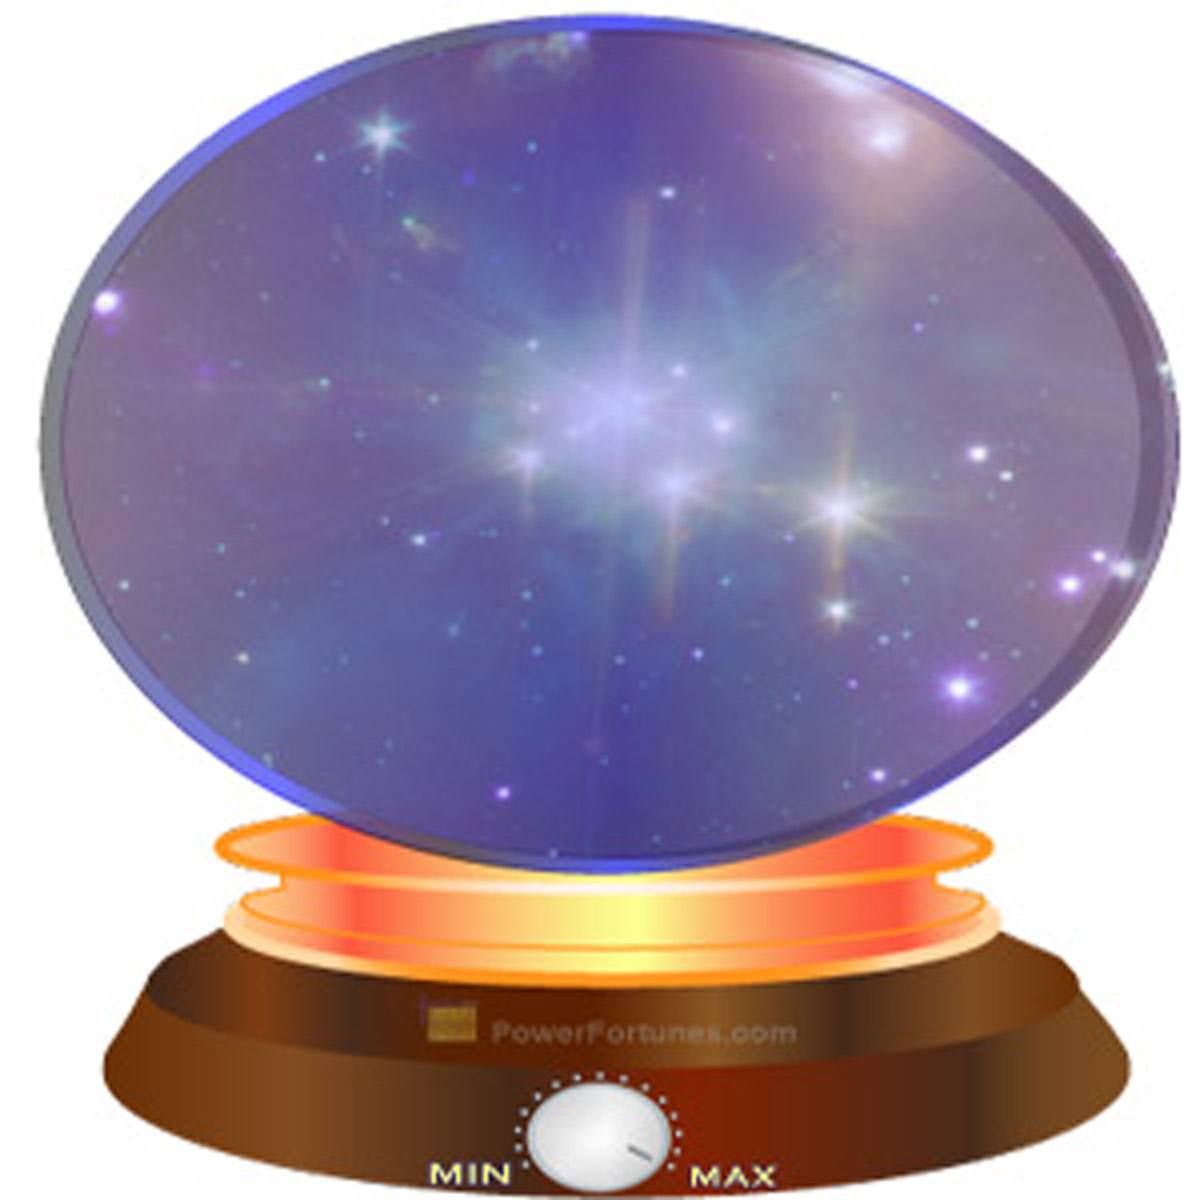 A crystal ball with a turn-up dial indicating the maximum results for a psychic reading.